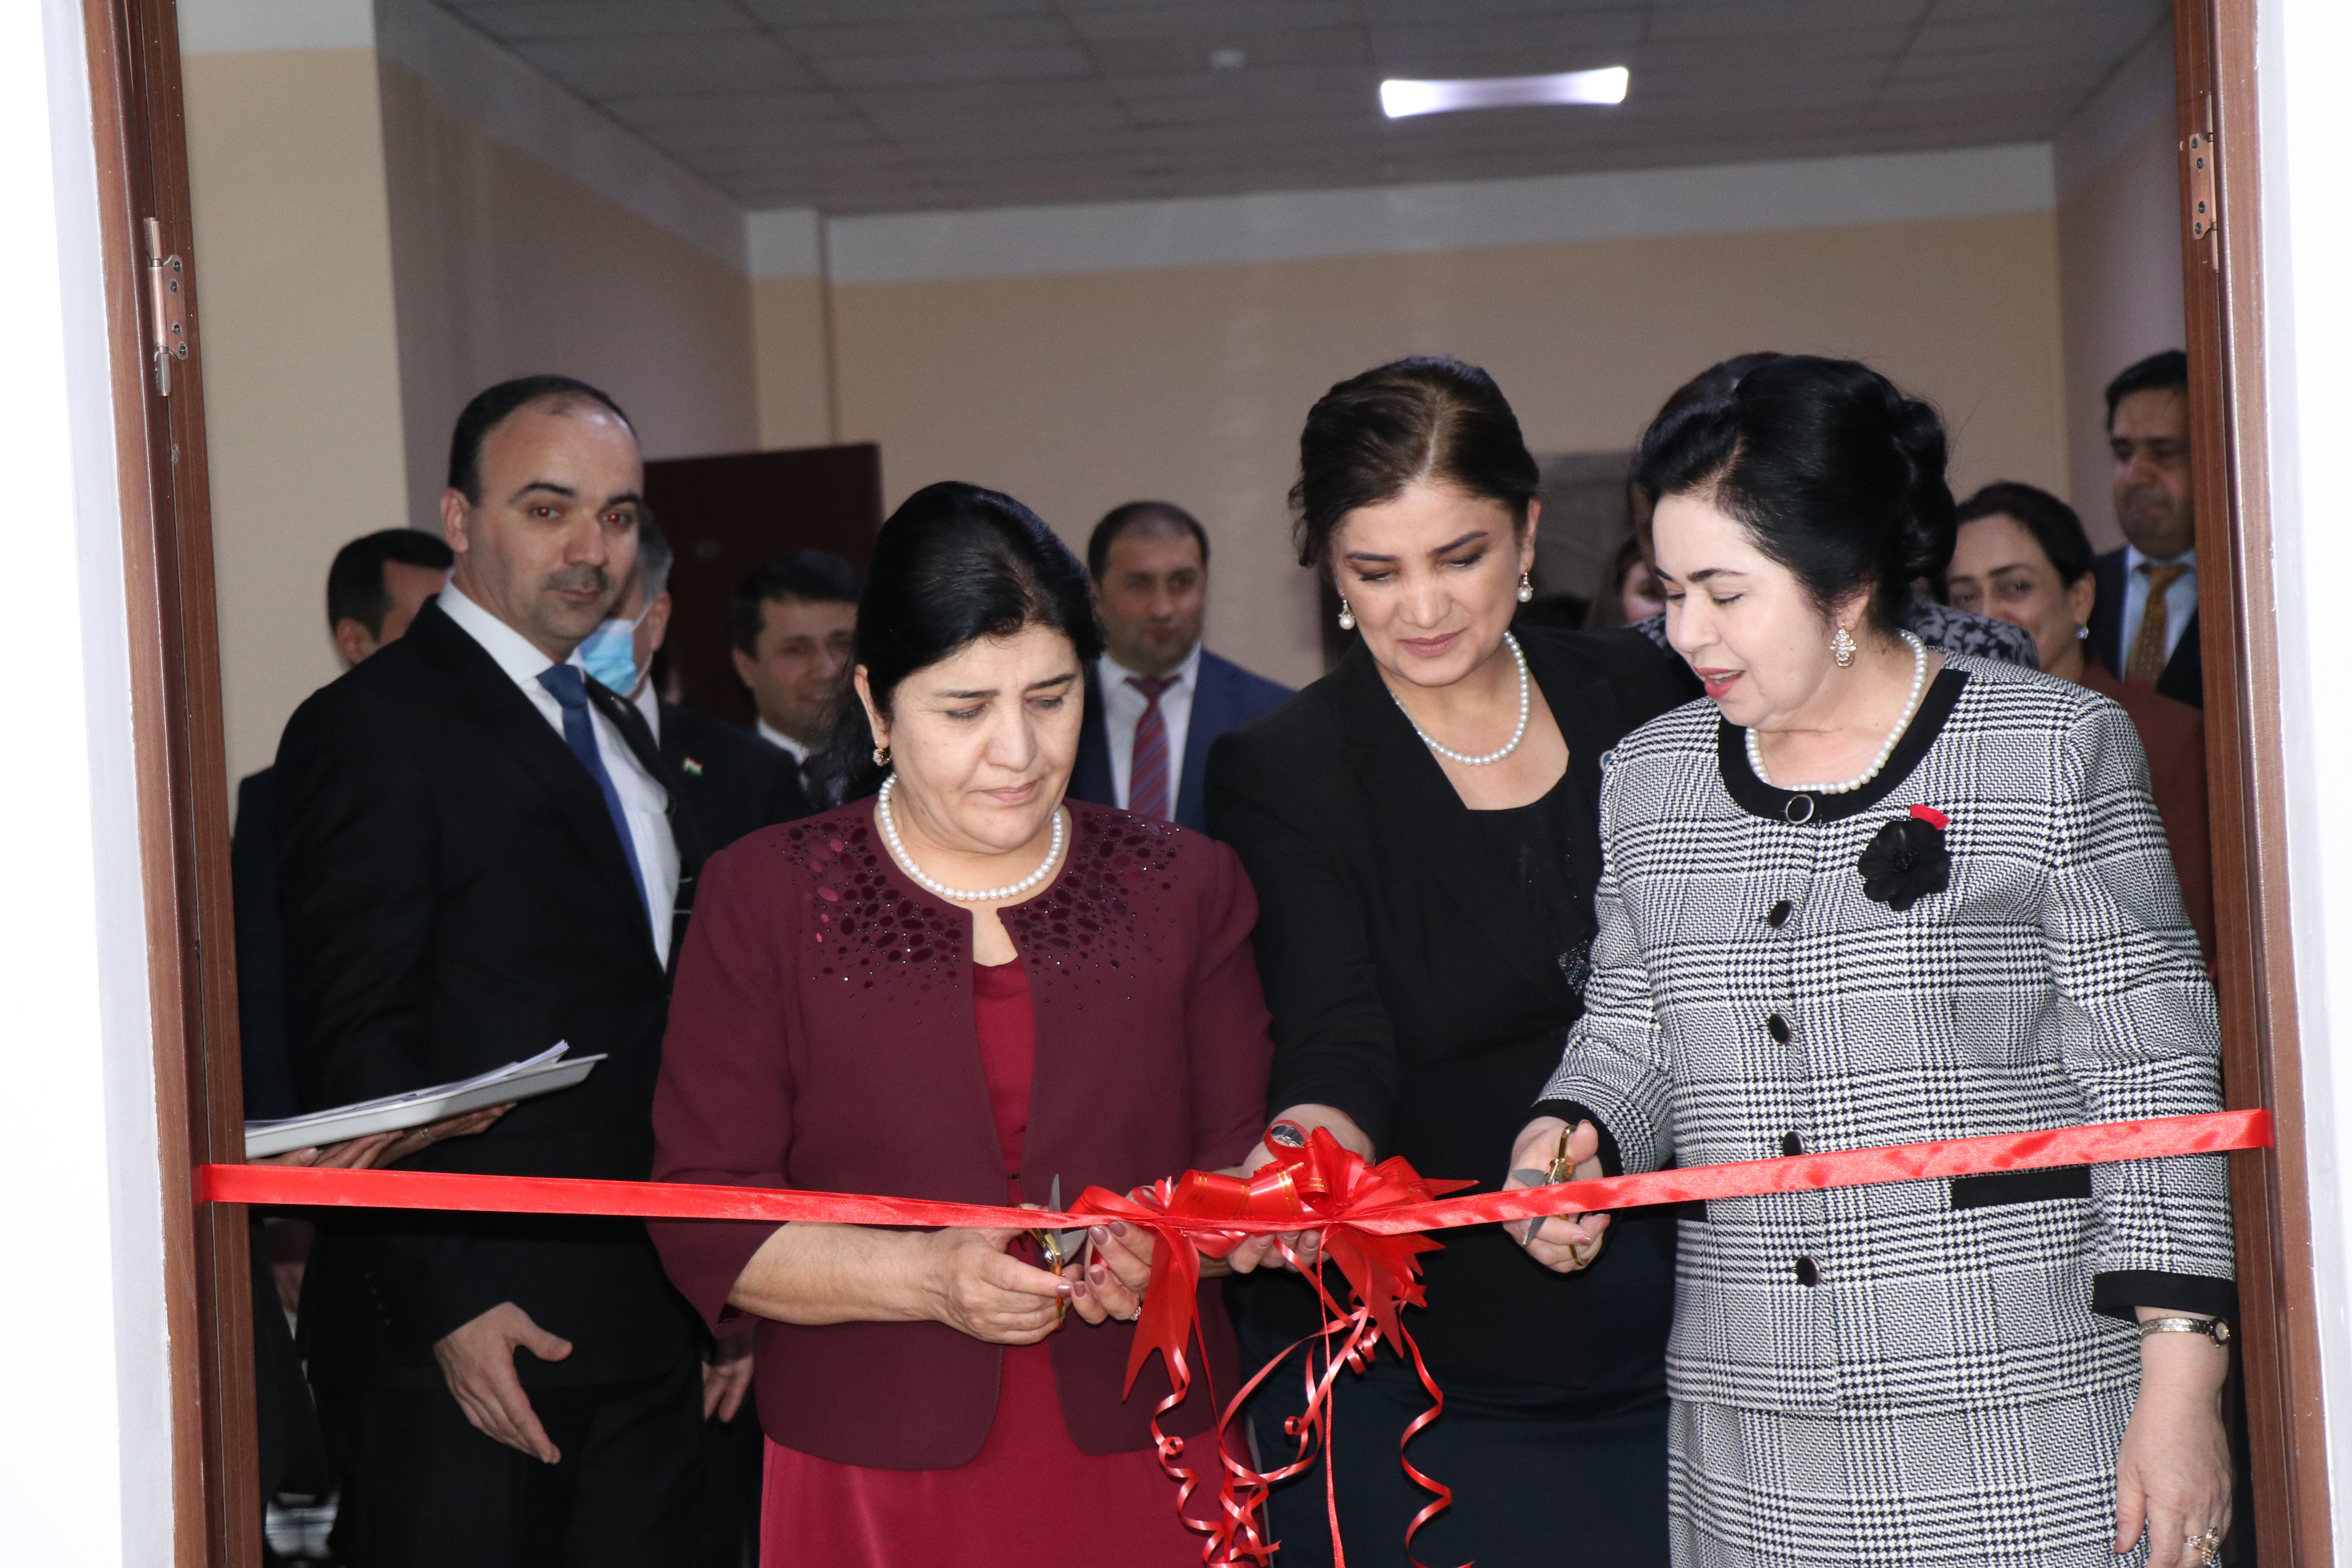 Mr. Ghafurzoda, Rector of APA, Ms. Olimsho Mehri from the Executive Office of the President of the Republic of Tajikistan, Ms. Amonzoda Shirin, Minister of Labour, Migration and Employment and Ms. Kurbonzoda, Chairperson of the Committee on Women and Family Affairs at the opening ceremony of the "SDG Centre for capacity-building of talented women and women in decision-making". Photo: UN Women Tajikistan